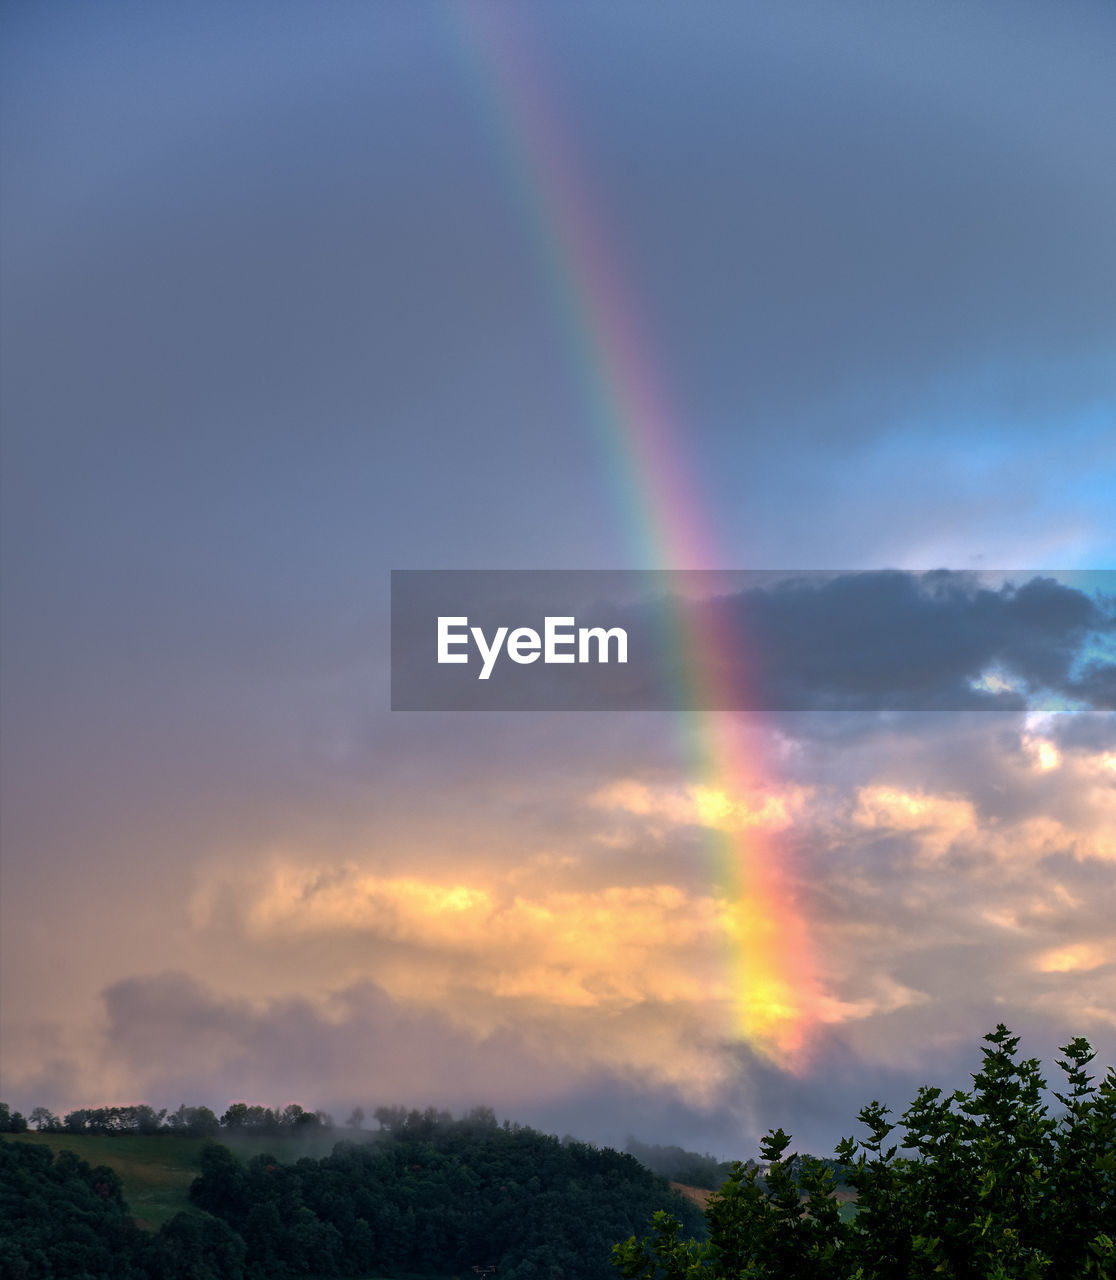 SCENIC VIEW OF RAINBOW OVER TREES AGAINST CLOUDY SKY